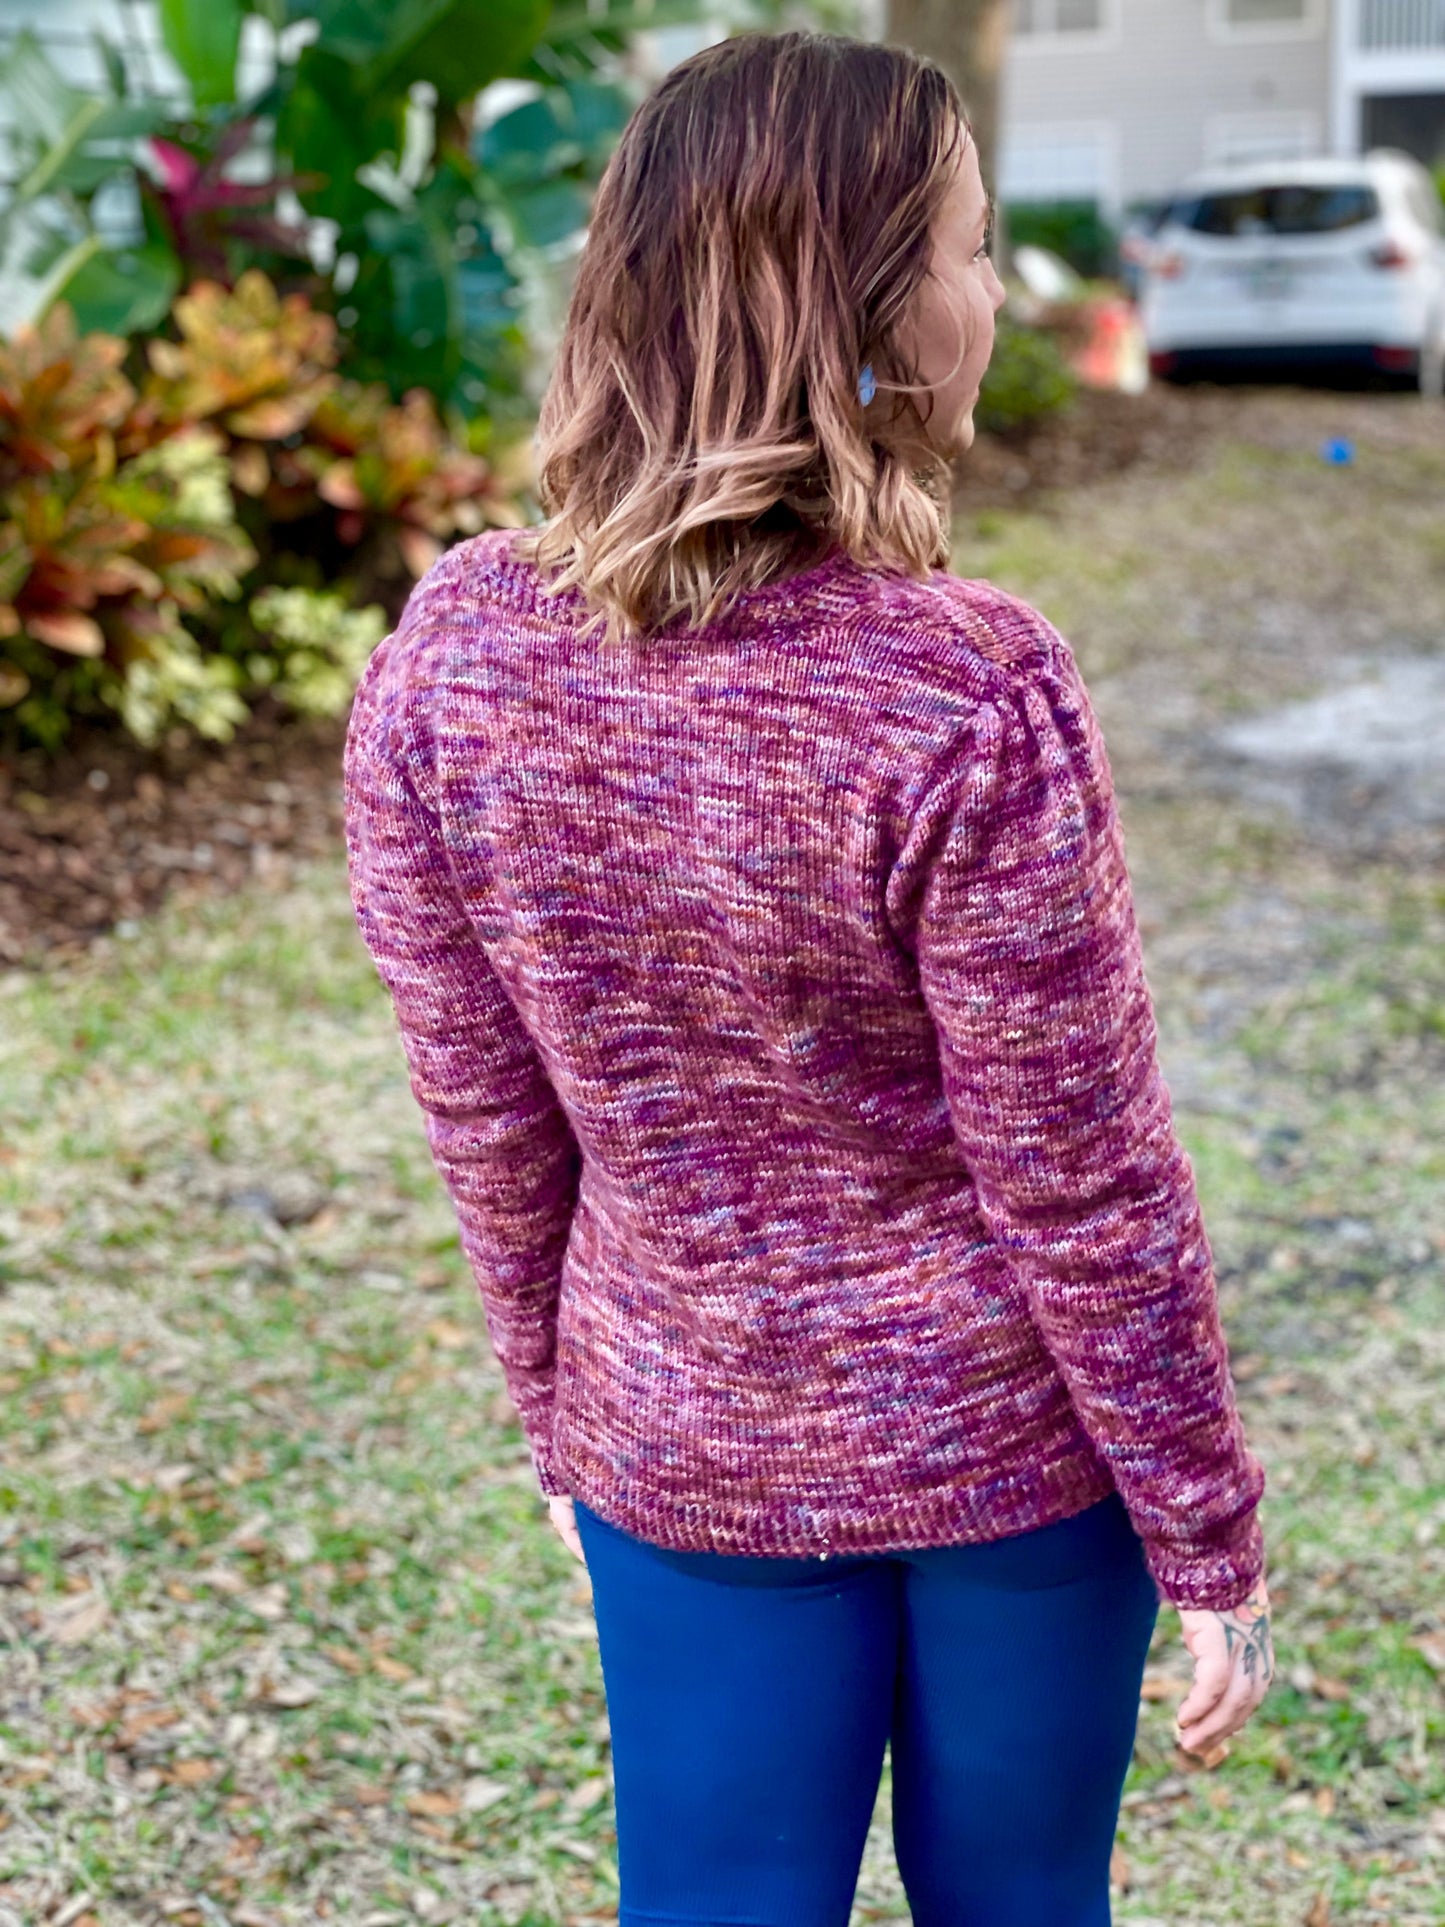 Seen from behind, Bess stands in a backyard. She wears a pink variegated sweater, knit with gathered and pleated sleeves, with a pair of blue leggings.